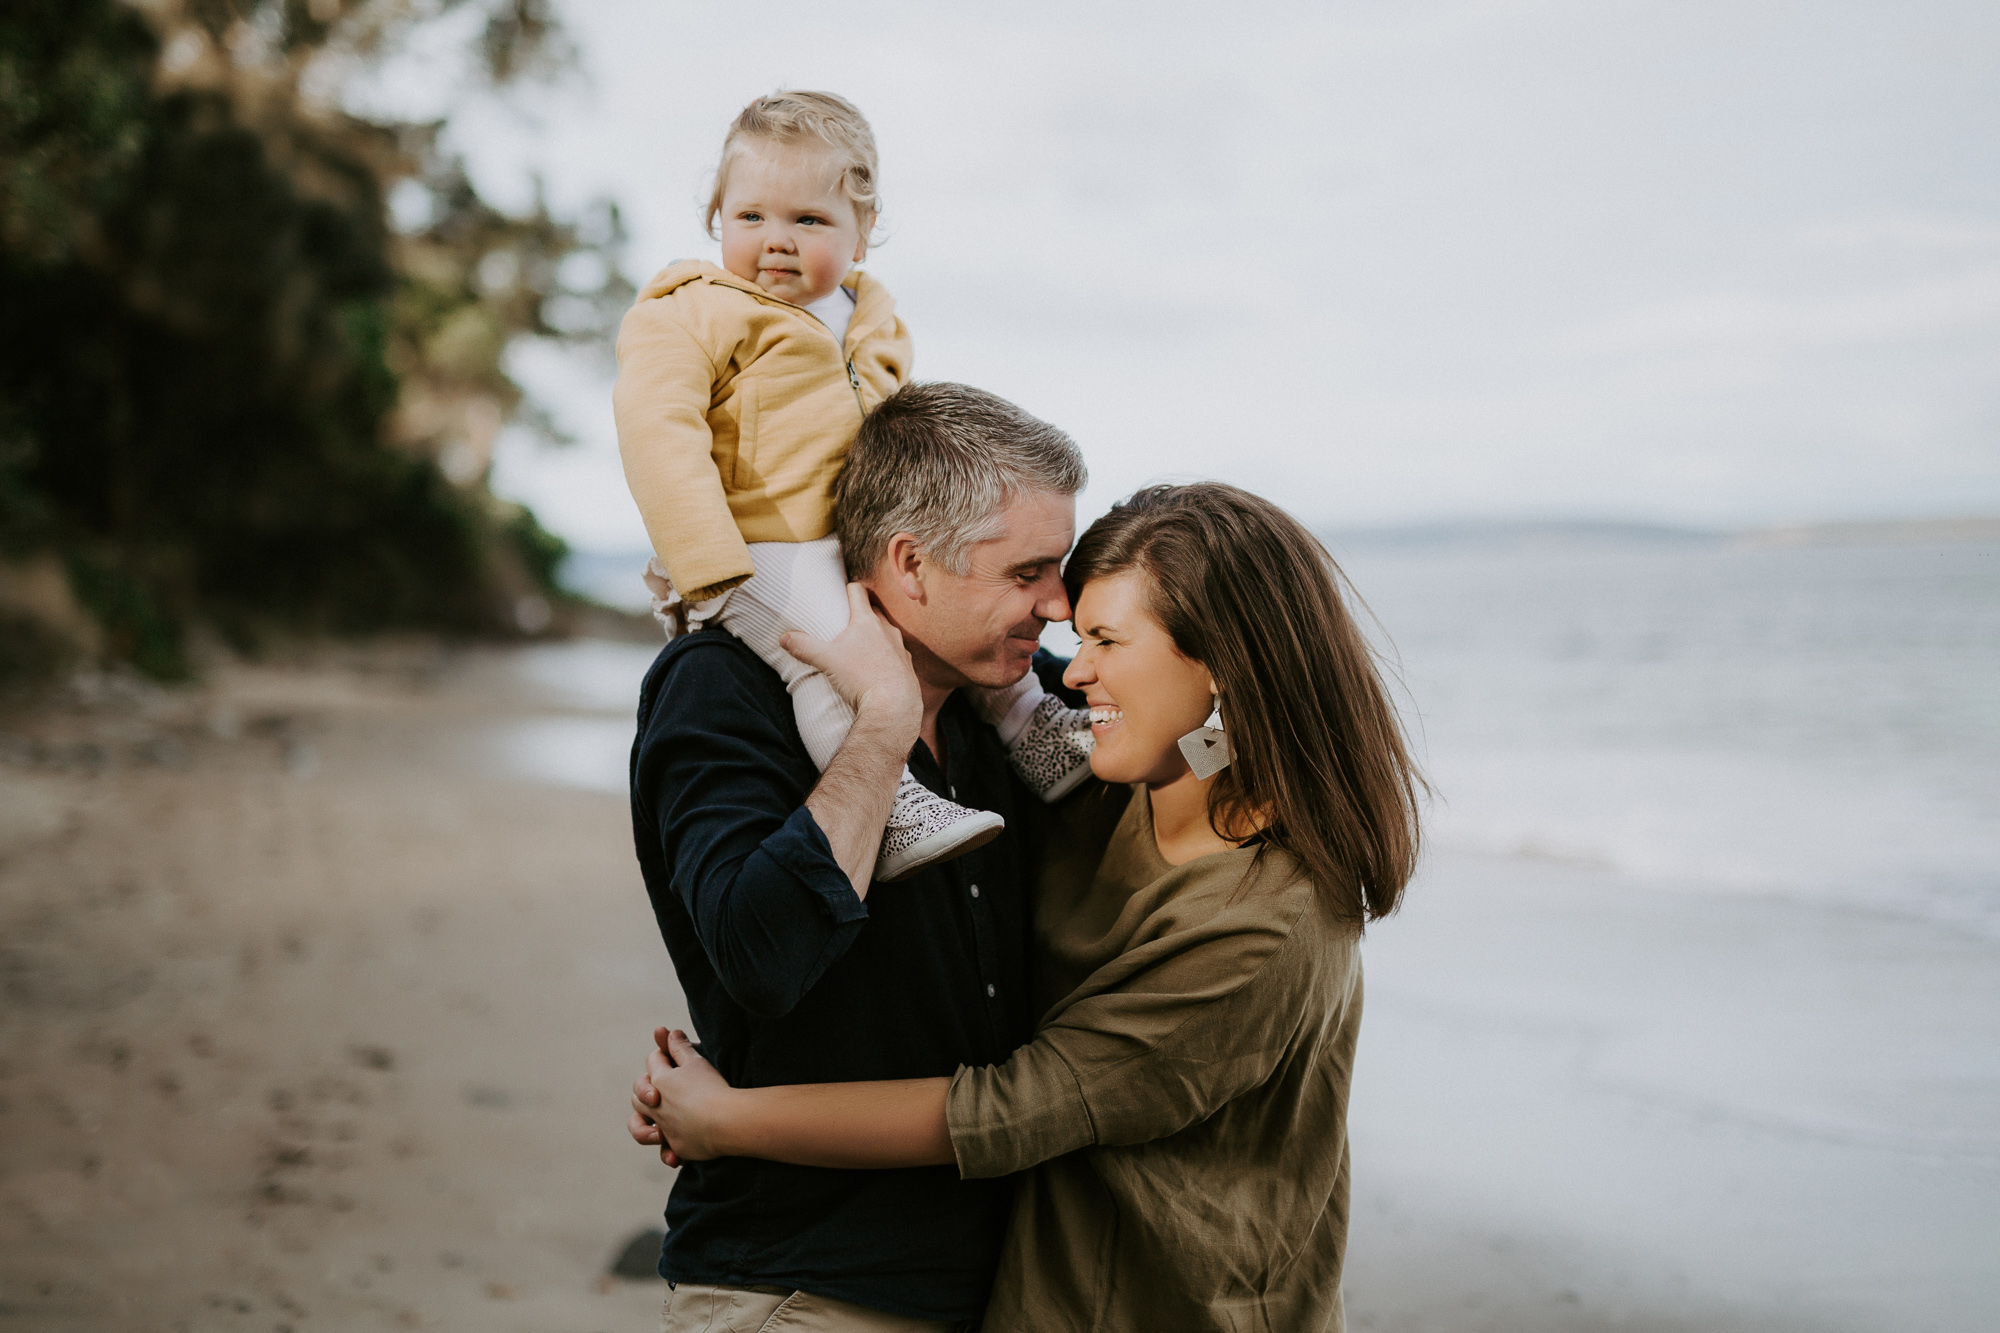 Hinsby Beach Family by Ulla Nordwood – 0005